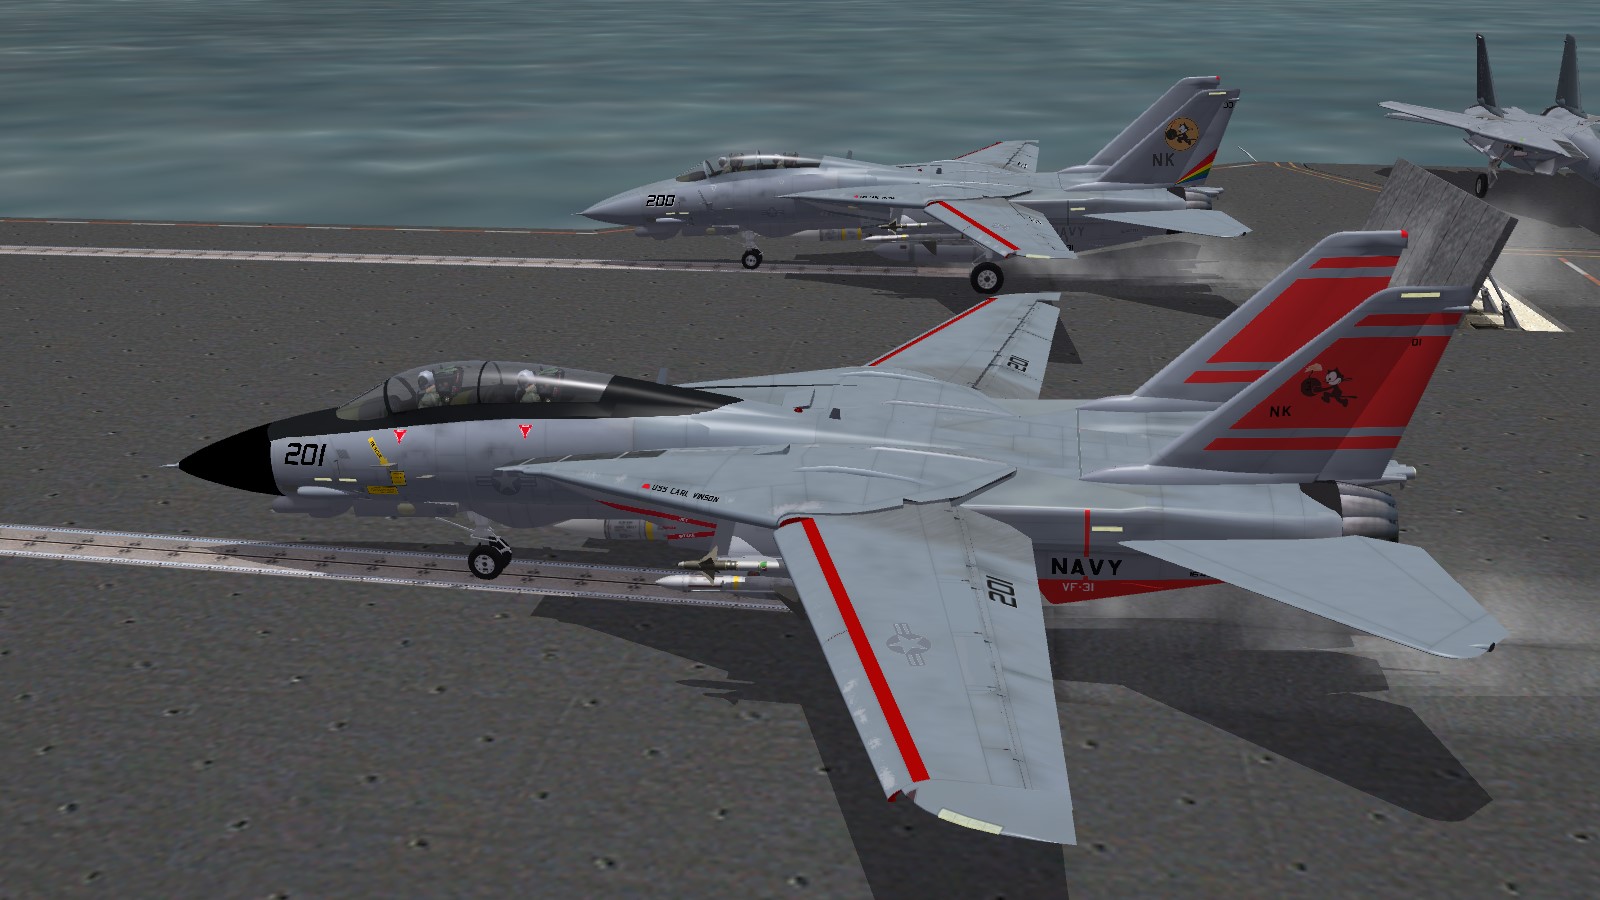 VF-11 and VF-31 F-14D